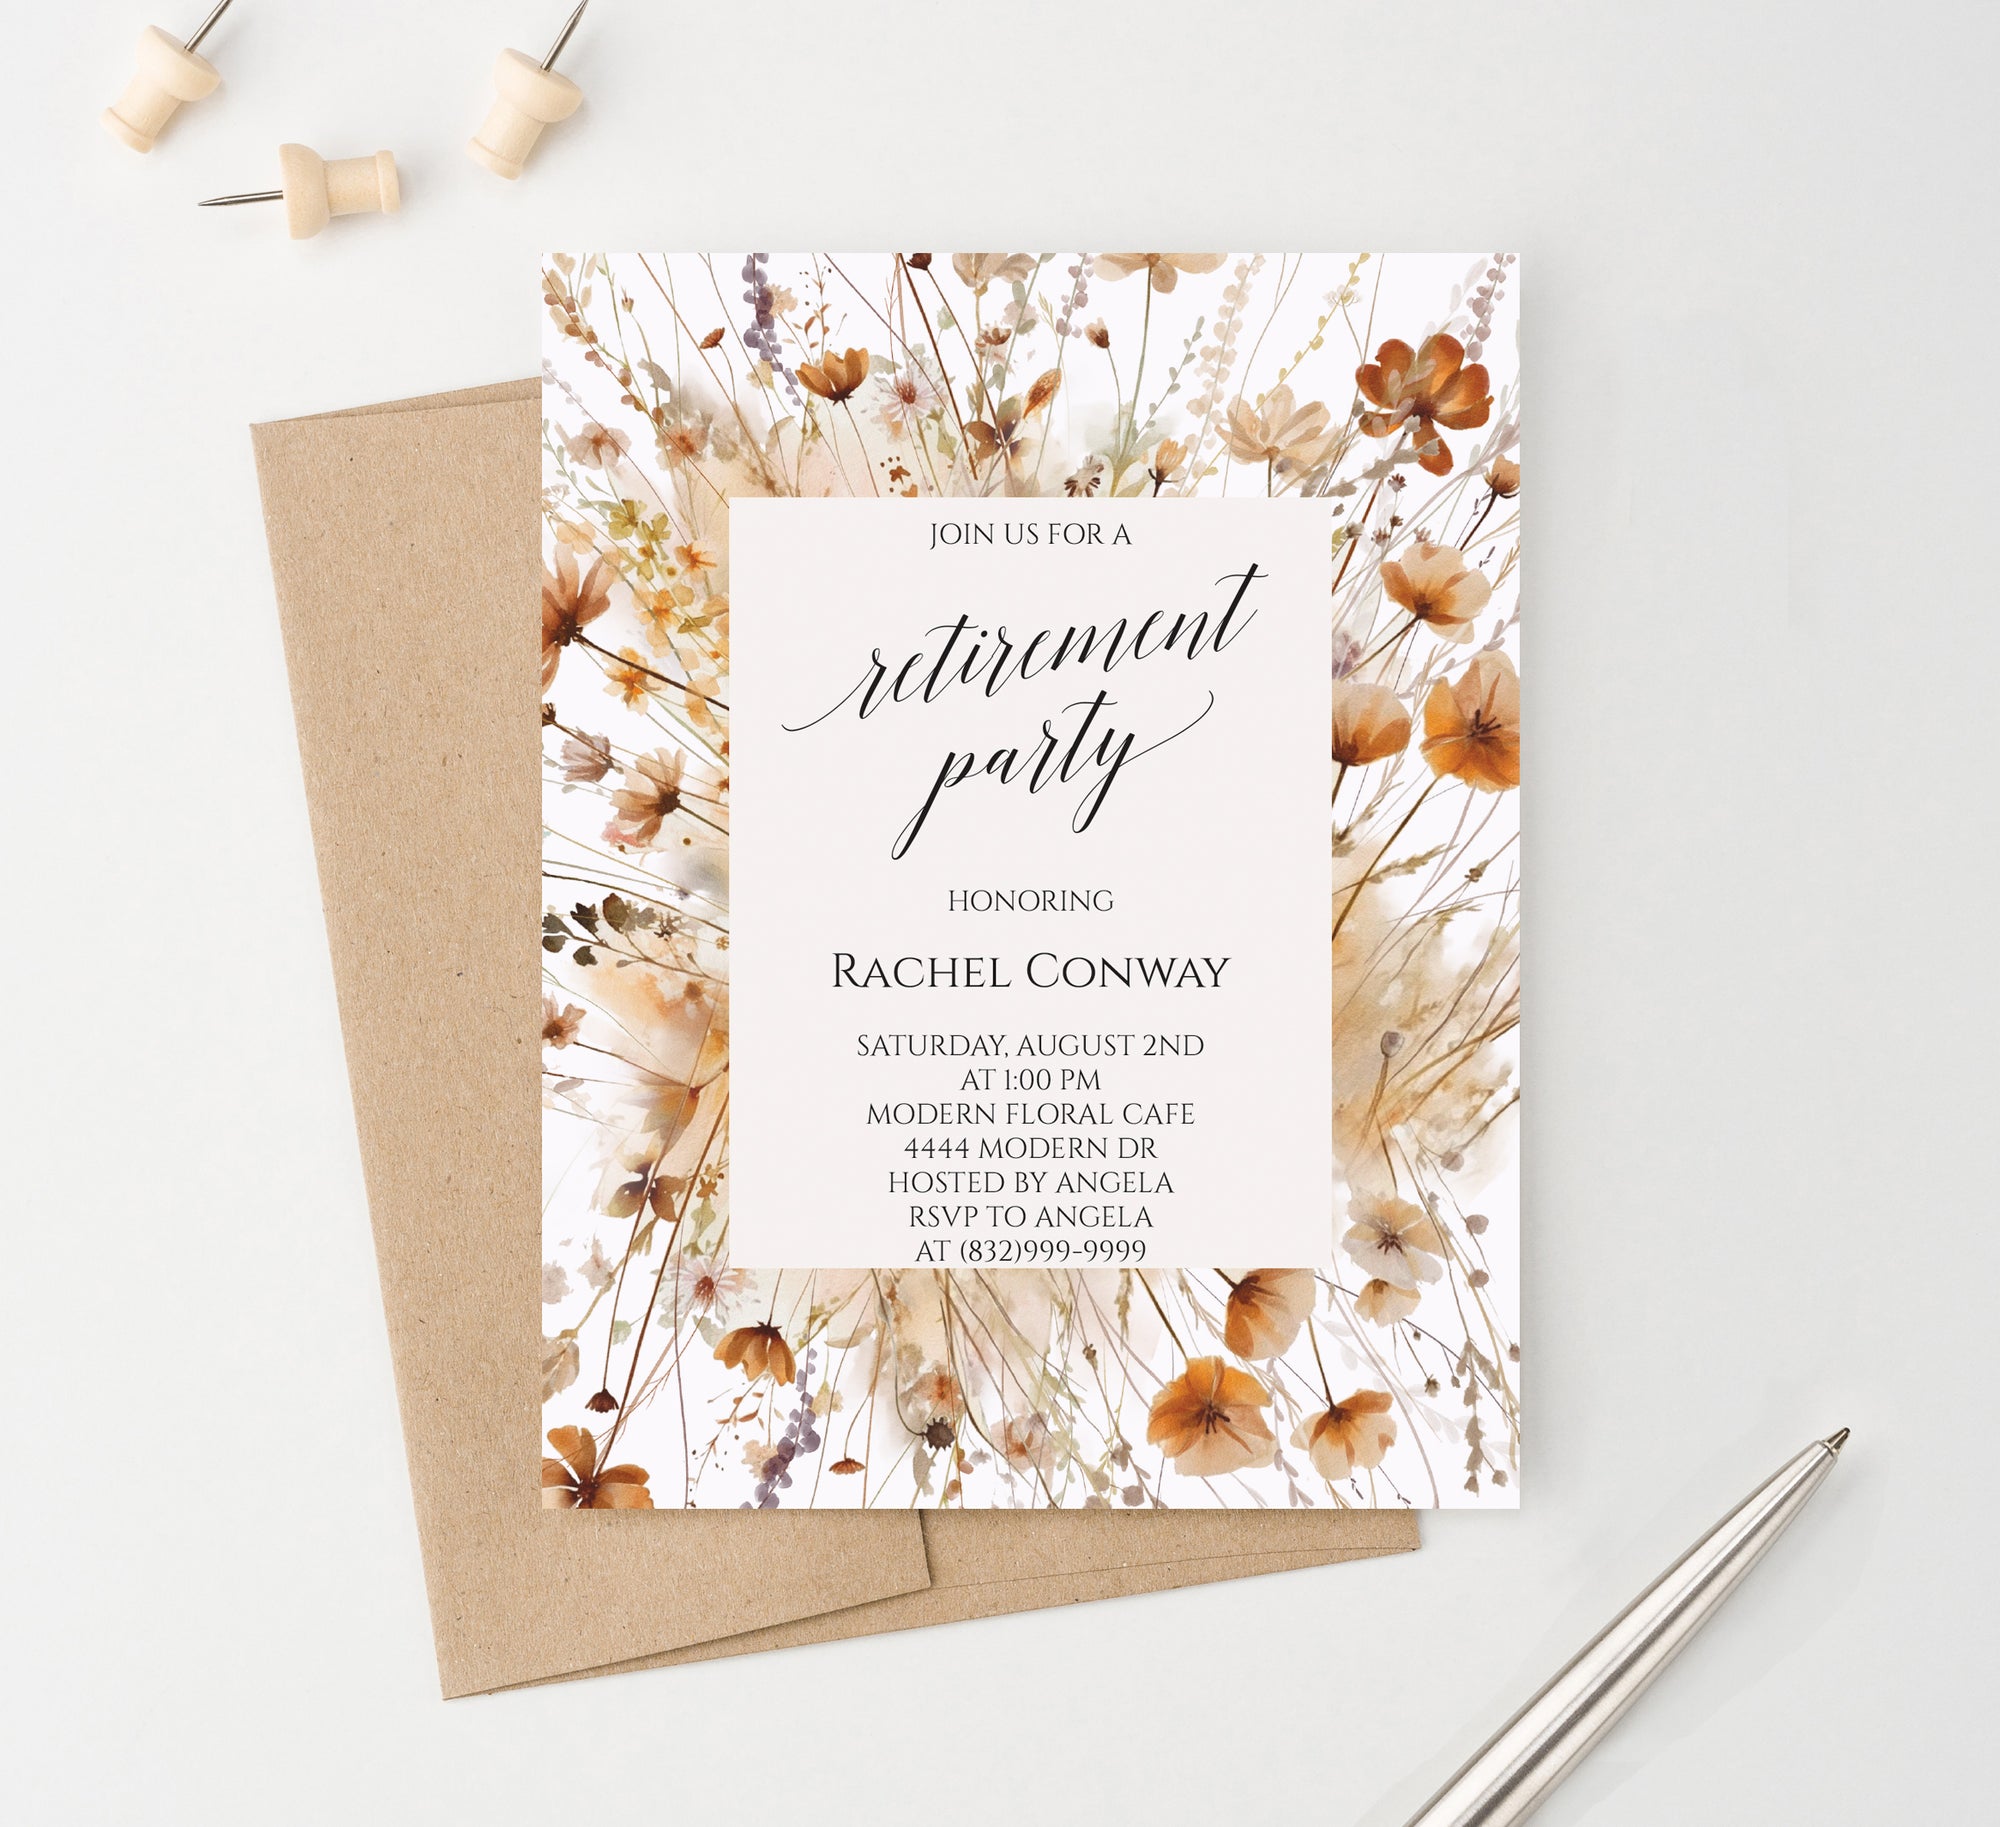 Boho Personalized Retirement Invitations With Fall Wildflowers